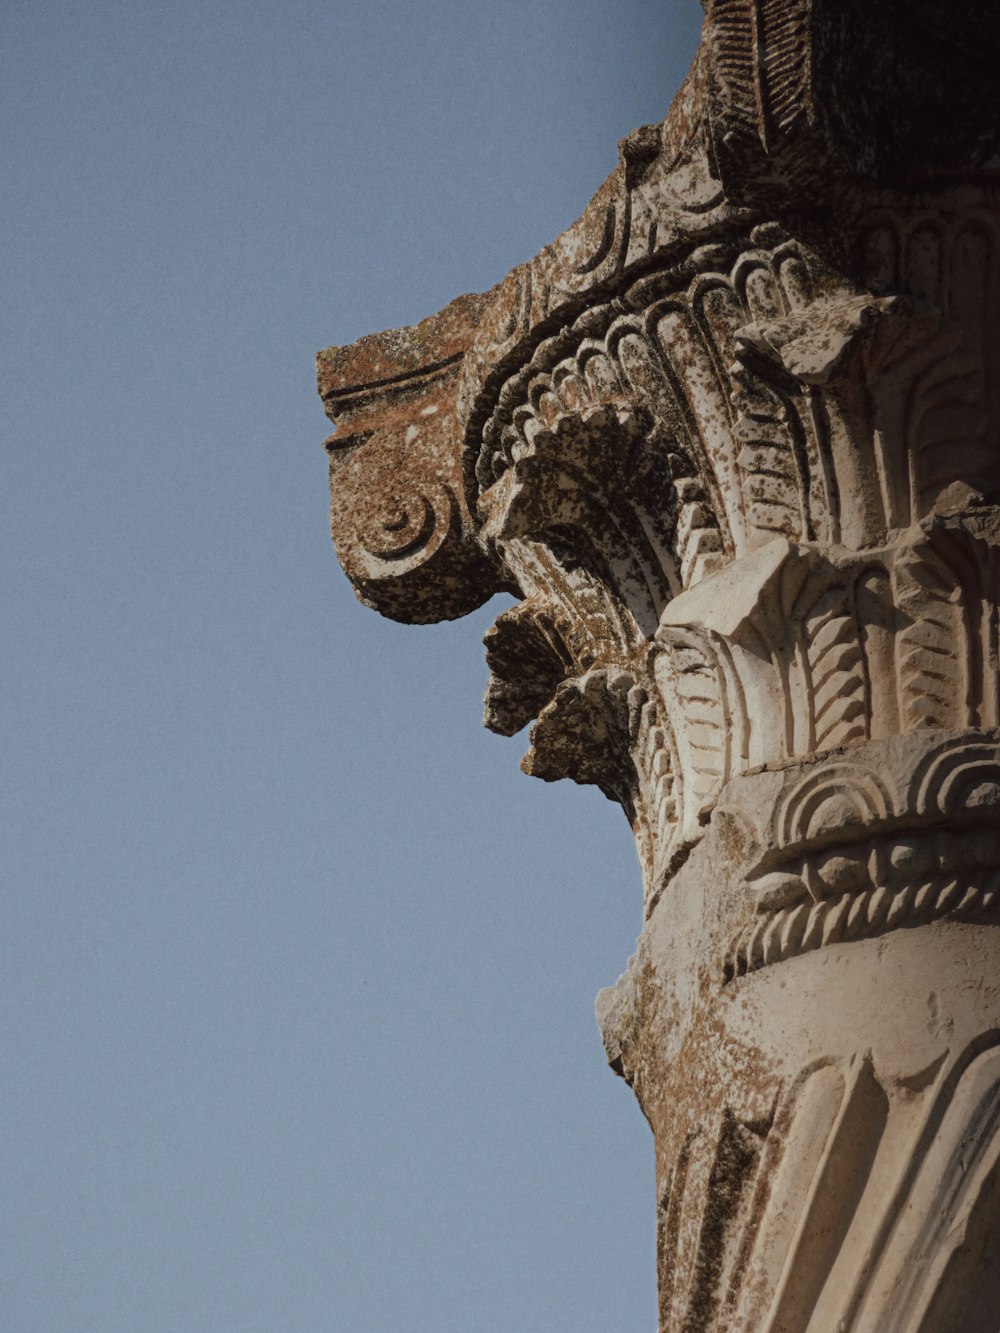 a bird is perched on top of a pillar